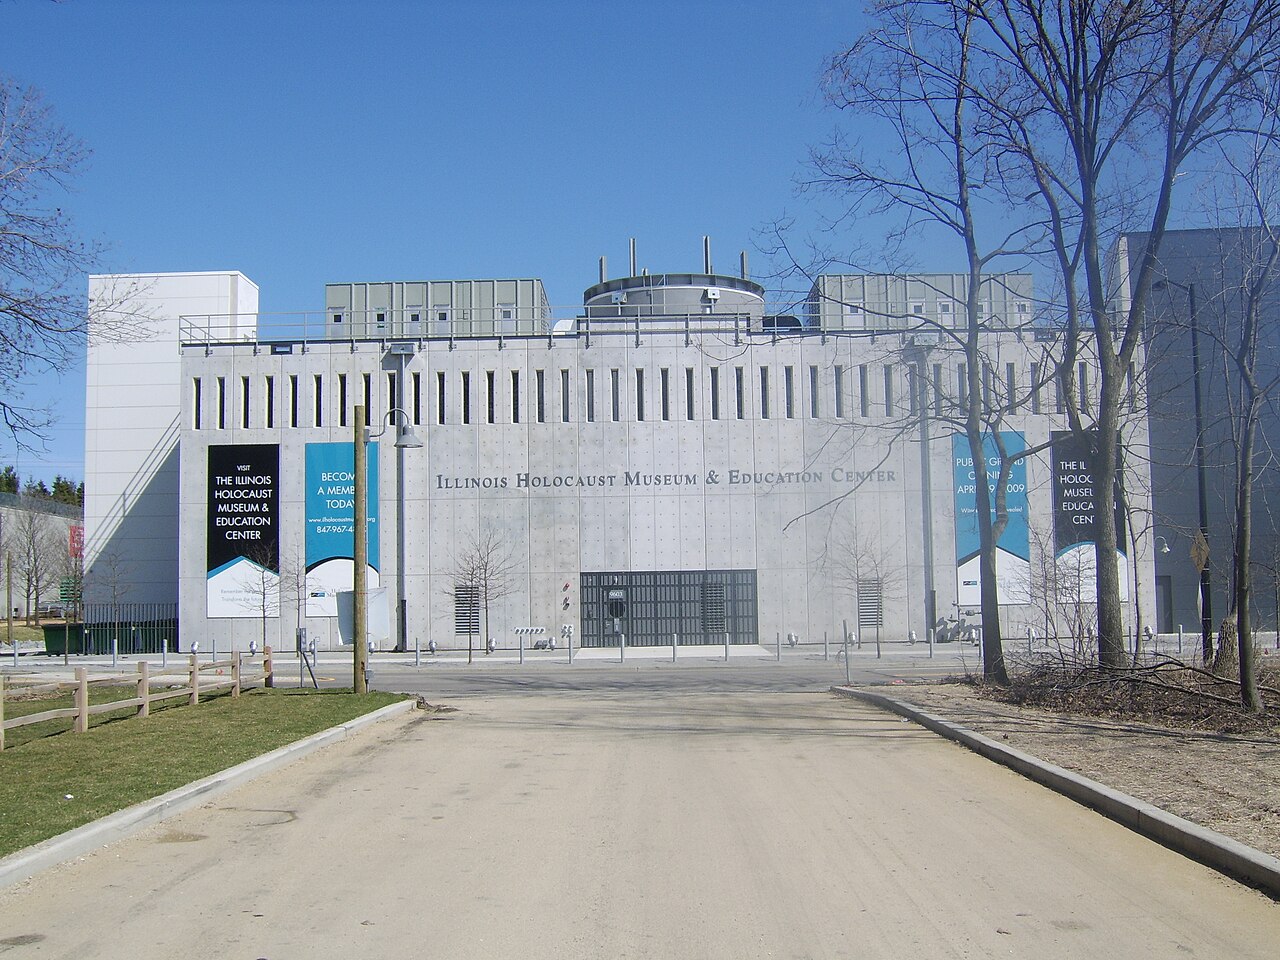 Experiencing Memory and Humanity: The Illinois Holocaust Museum